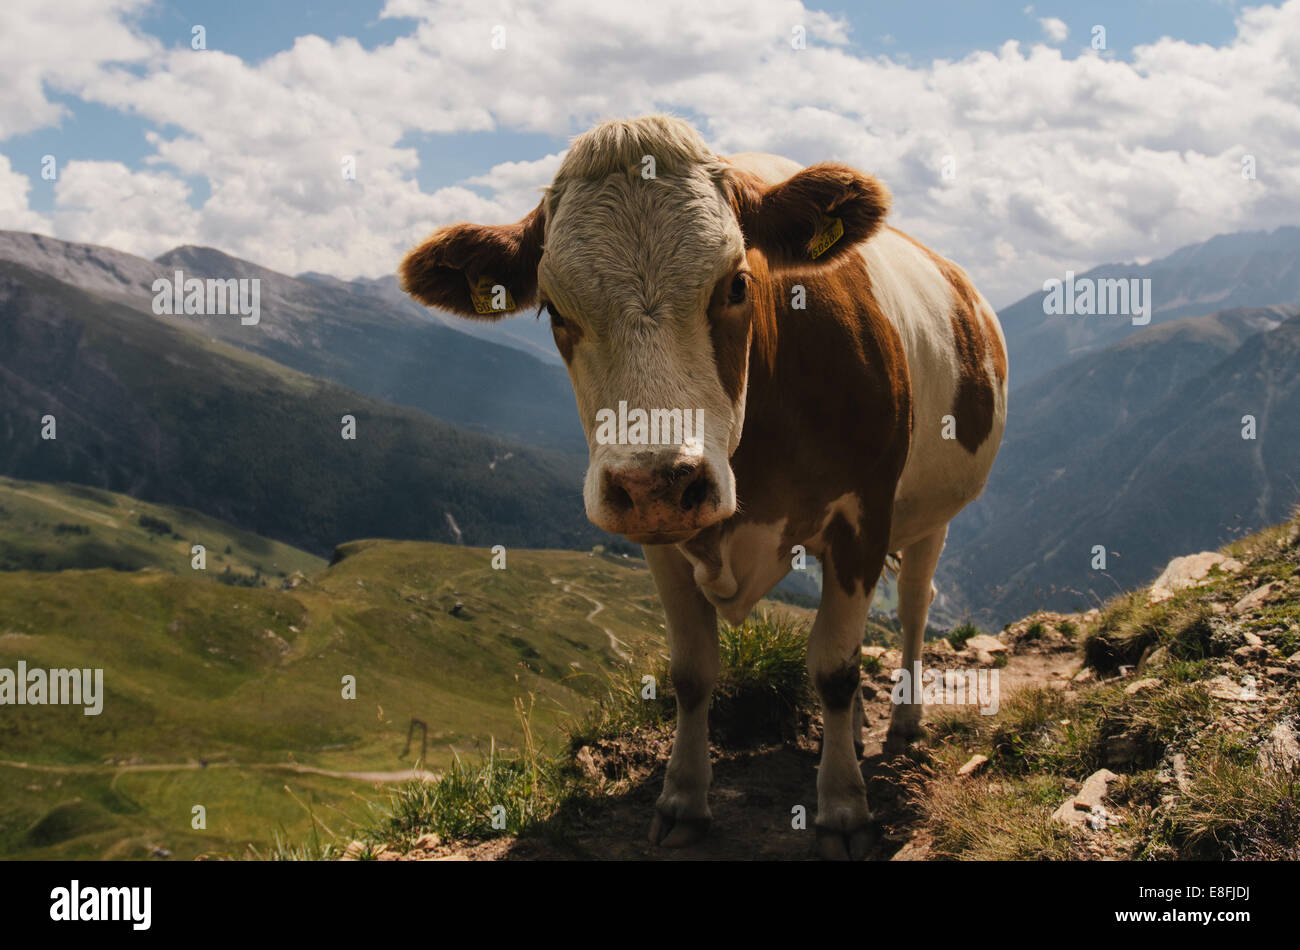 Cow standing in a mountain meadow Stock Photo